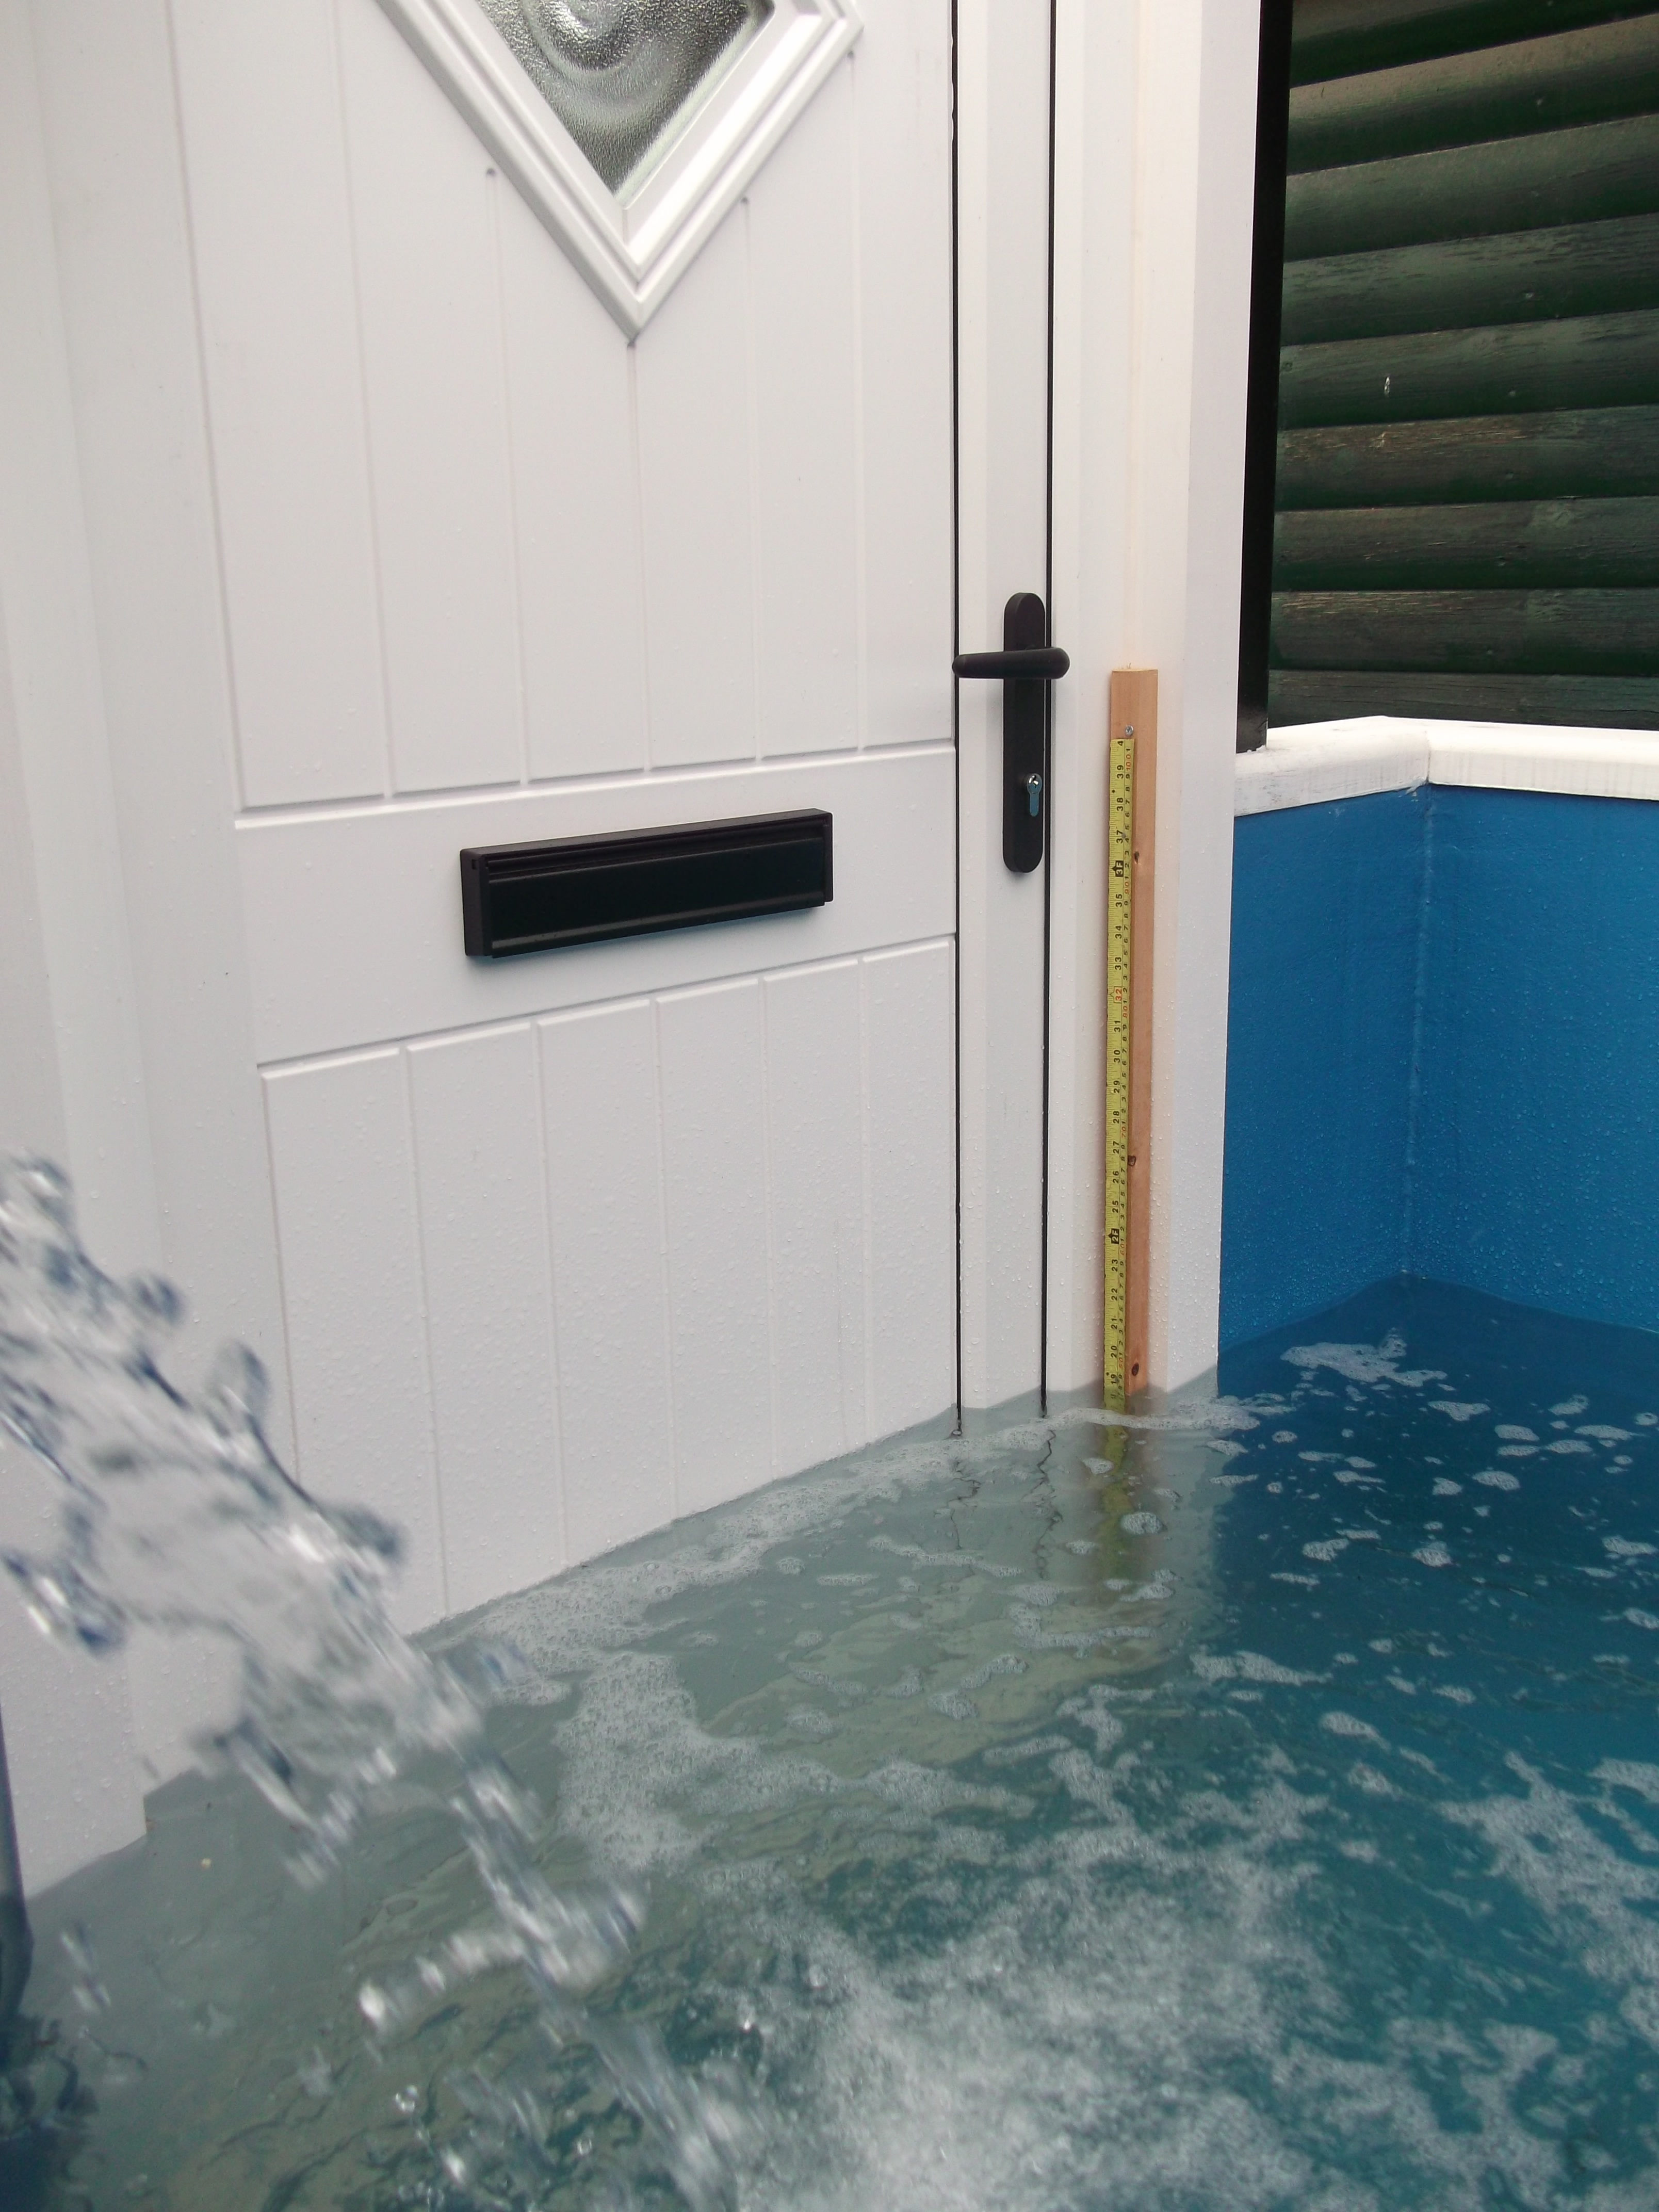 Flood Door Extreme Testing in Simulated Flood Conditions. StormMeister Flood Doors are available in white, Wood Grains, or  a range of Door Colour Options